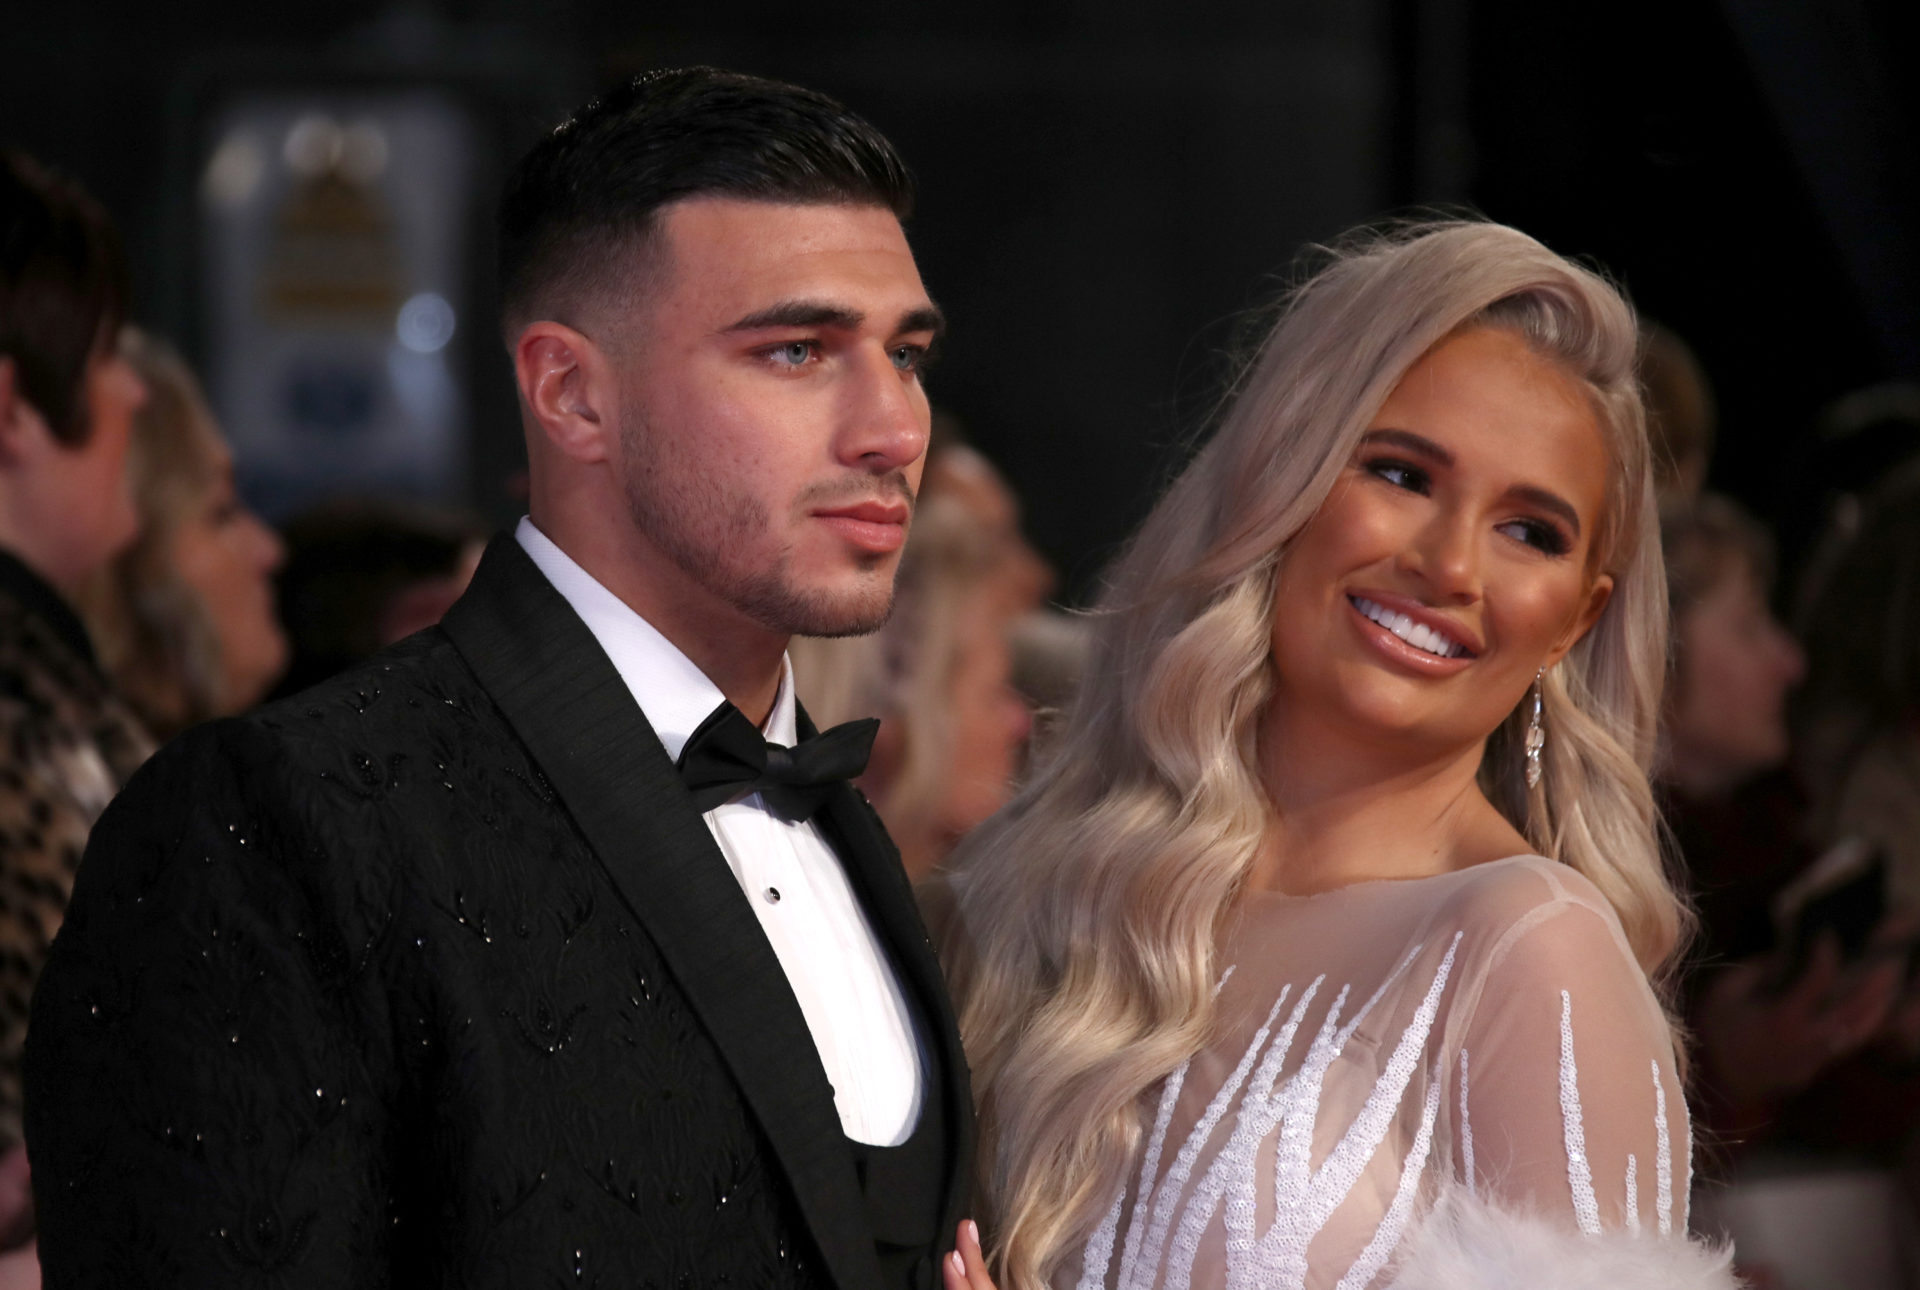 Molly Mae calls Tommy Fury her 'soulmate' as they celebrate anniversary